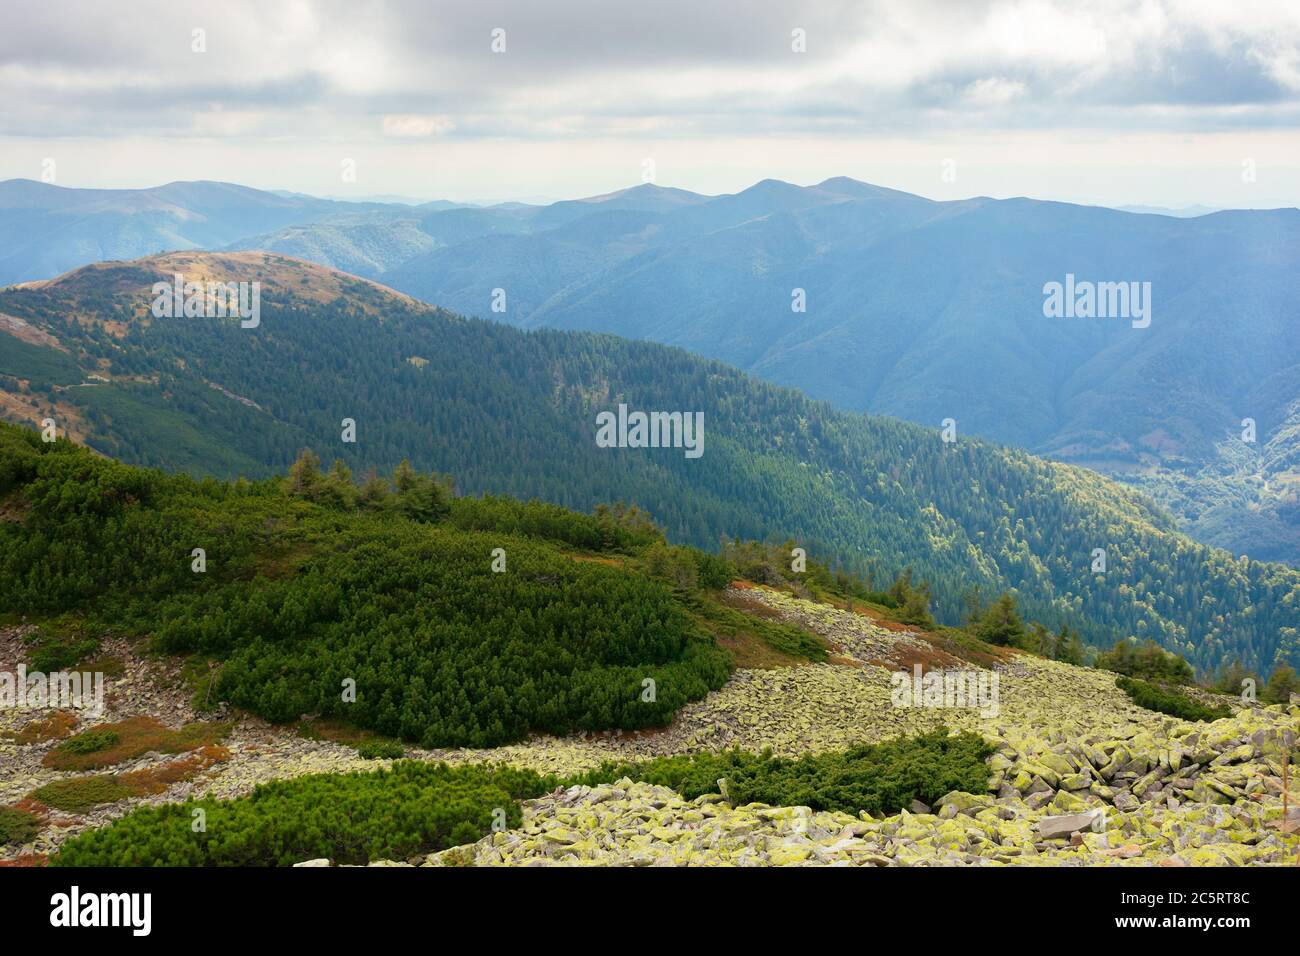 mountain landscape with green stones. juniper tree among the rocks and grass. dramatic nature scenery on a cloudy day. great view in to the distant kr Stock Photo